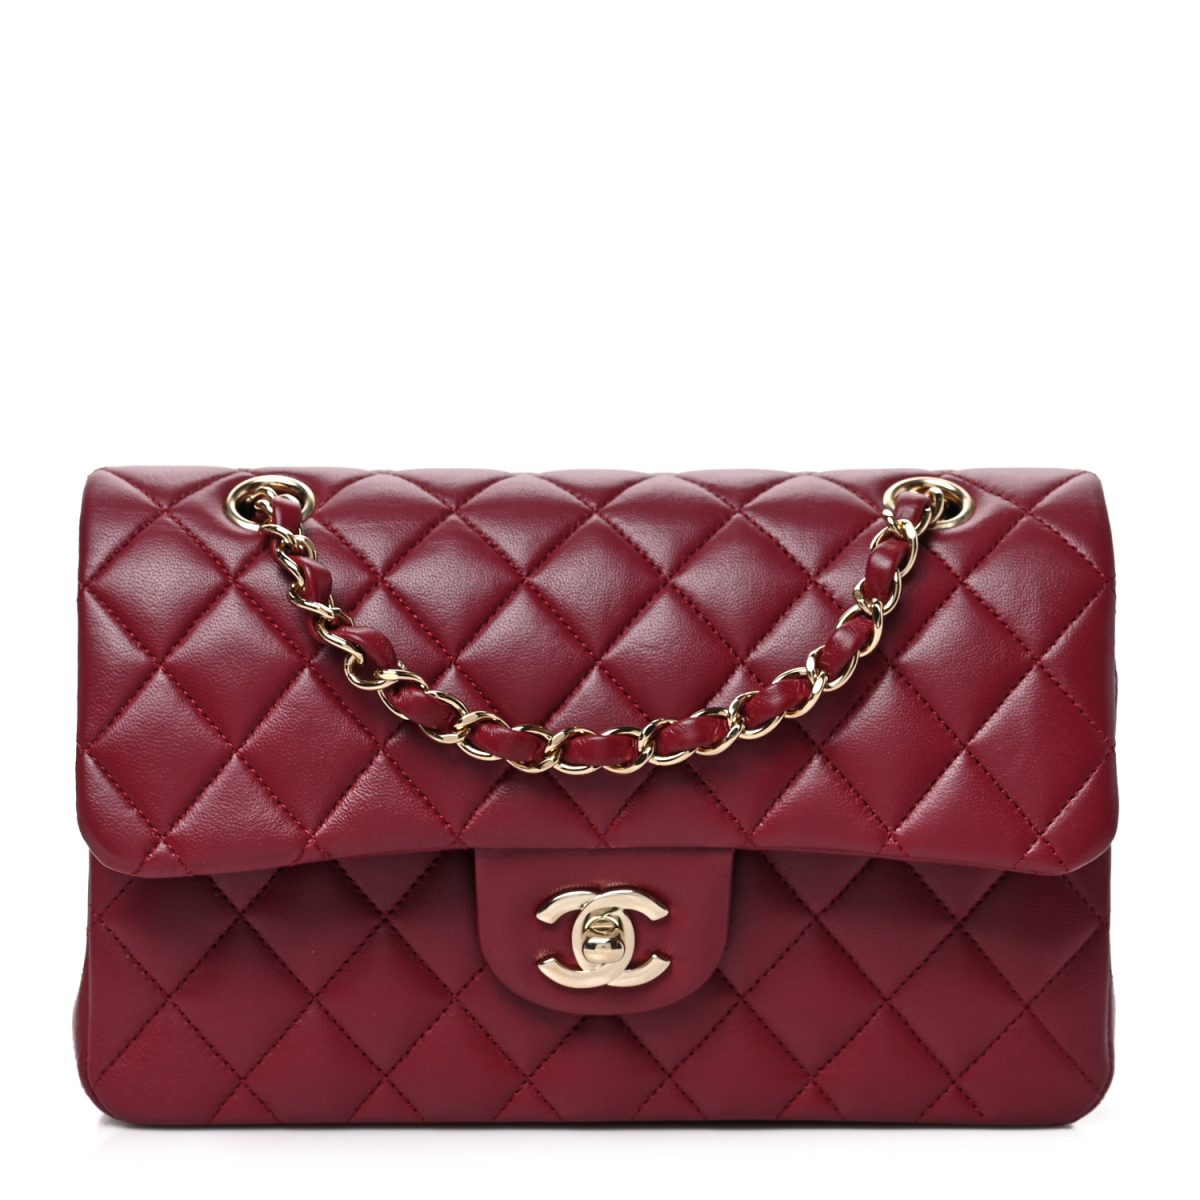 Burgundy Chanel Classic Flap Lambskin Quilted Medium Double Flap